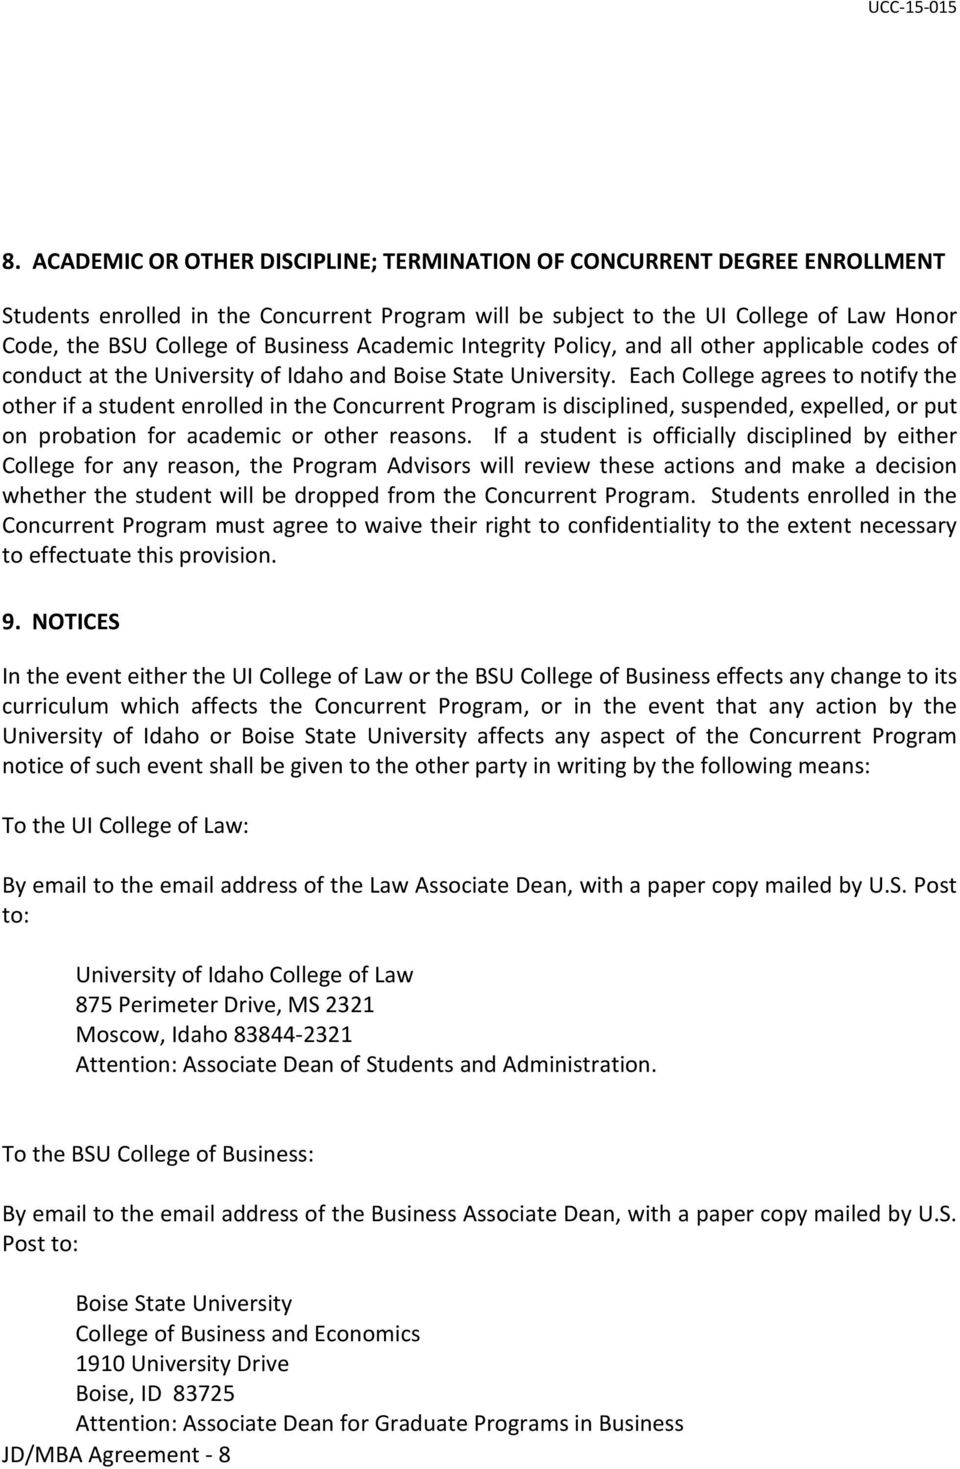 Each College agrees to notify the other if a student enrolled in the Concurrent Program is disciplined, suspended, expelled, or put on probation for academic or other reasons.